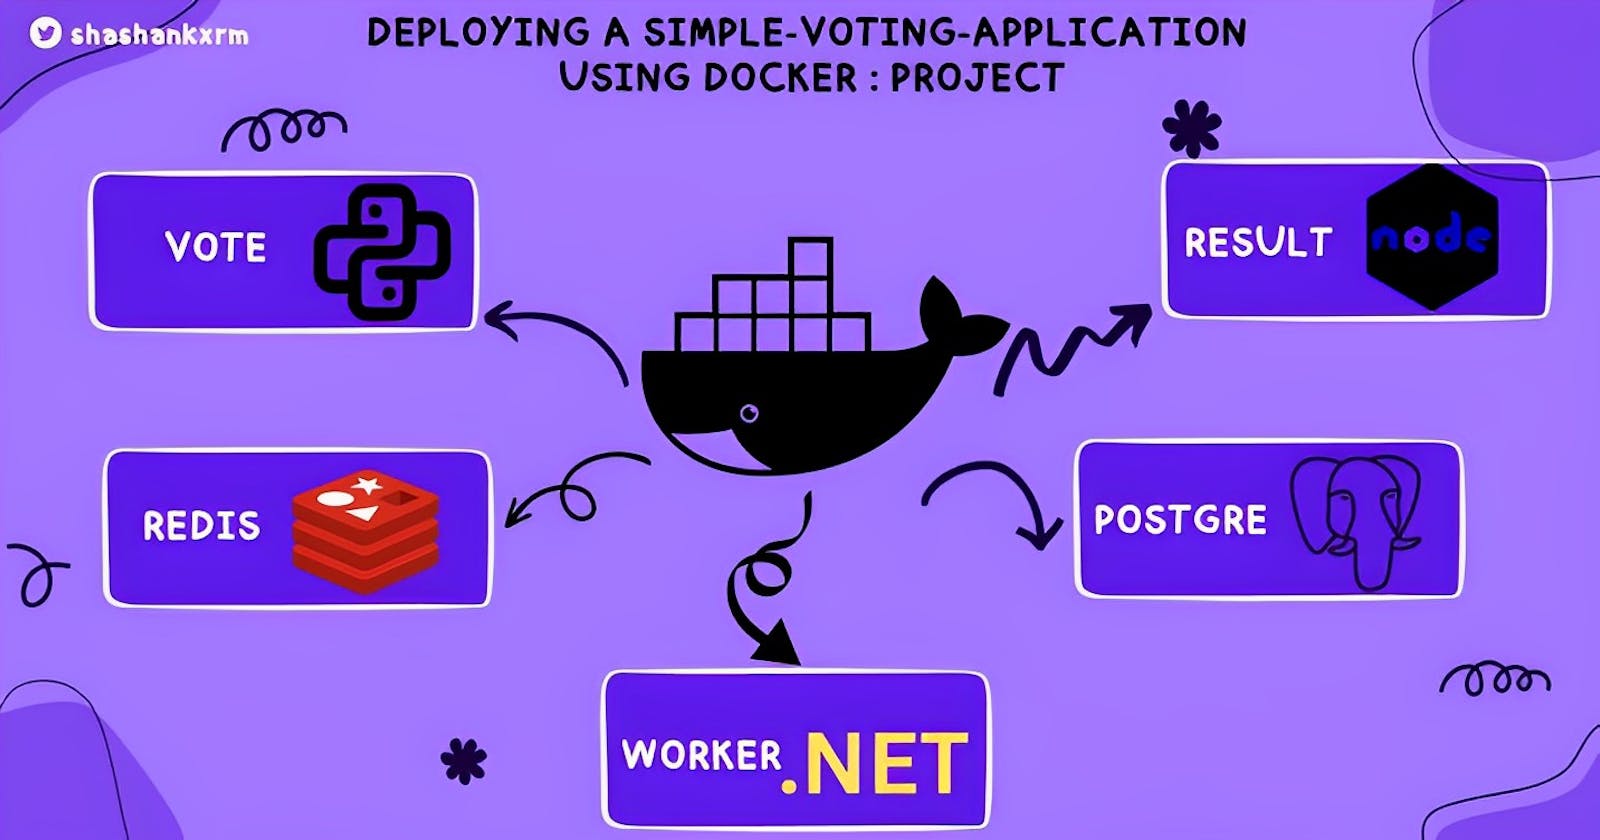 Deploying A Simple-Voting-Application Using Docker : Project